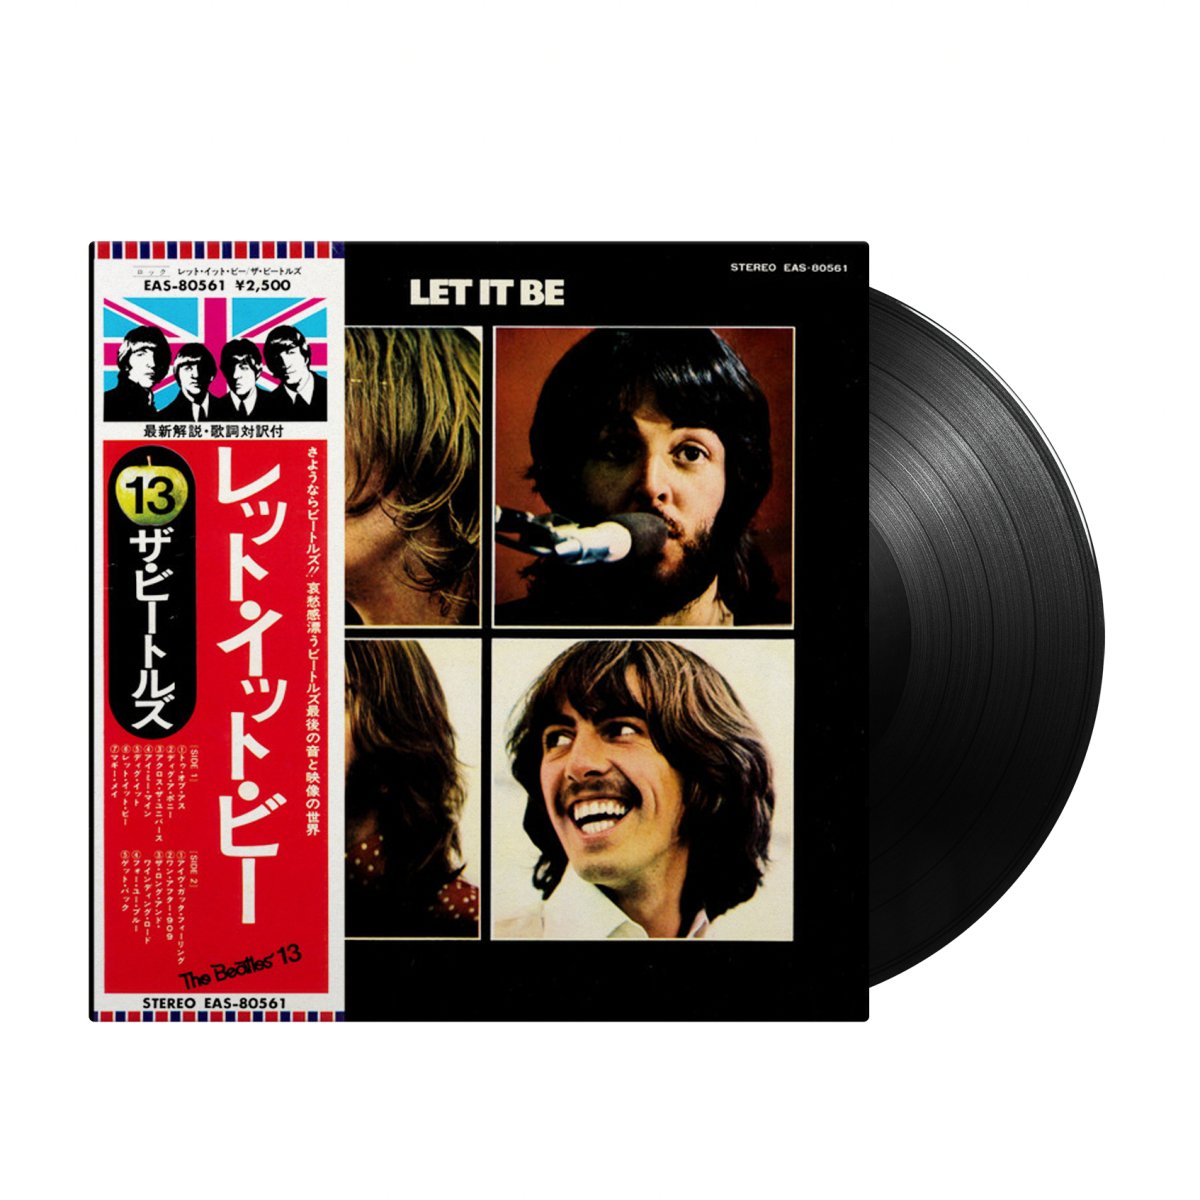 The Beatles - Let It Be (Japan Import)